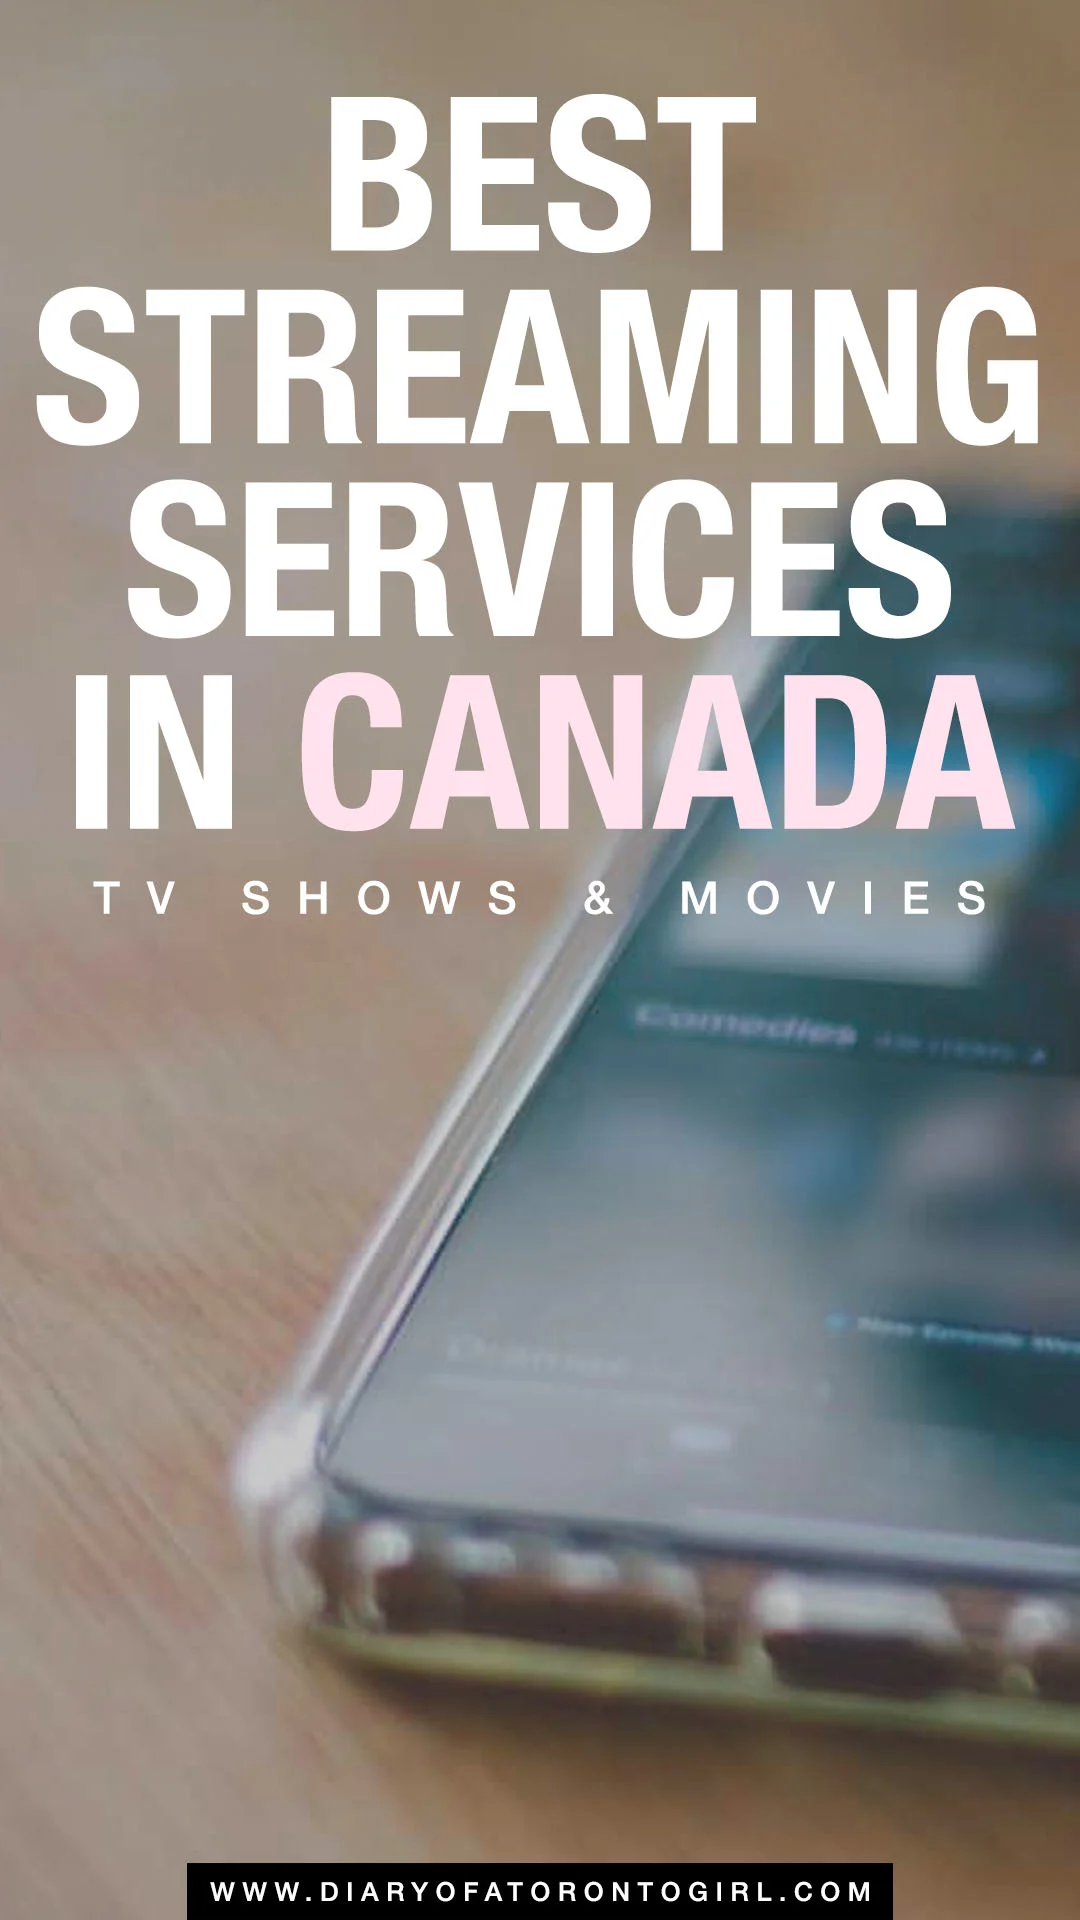 Best streaming services in Canada